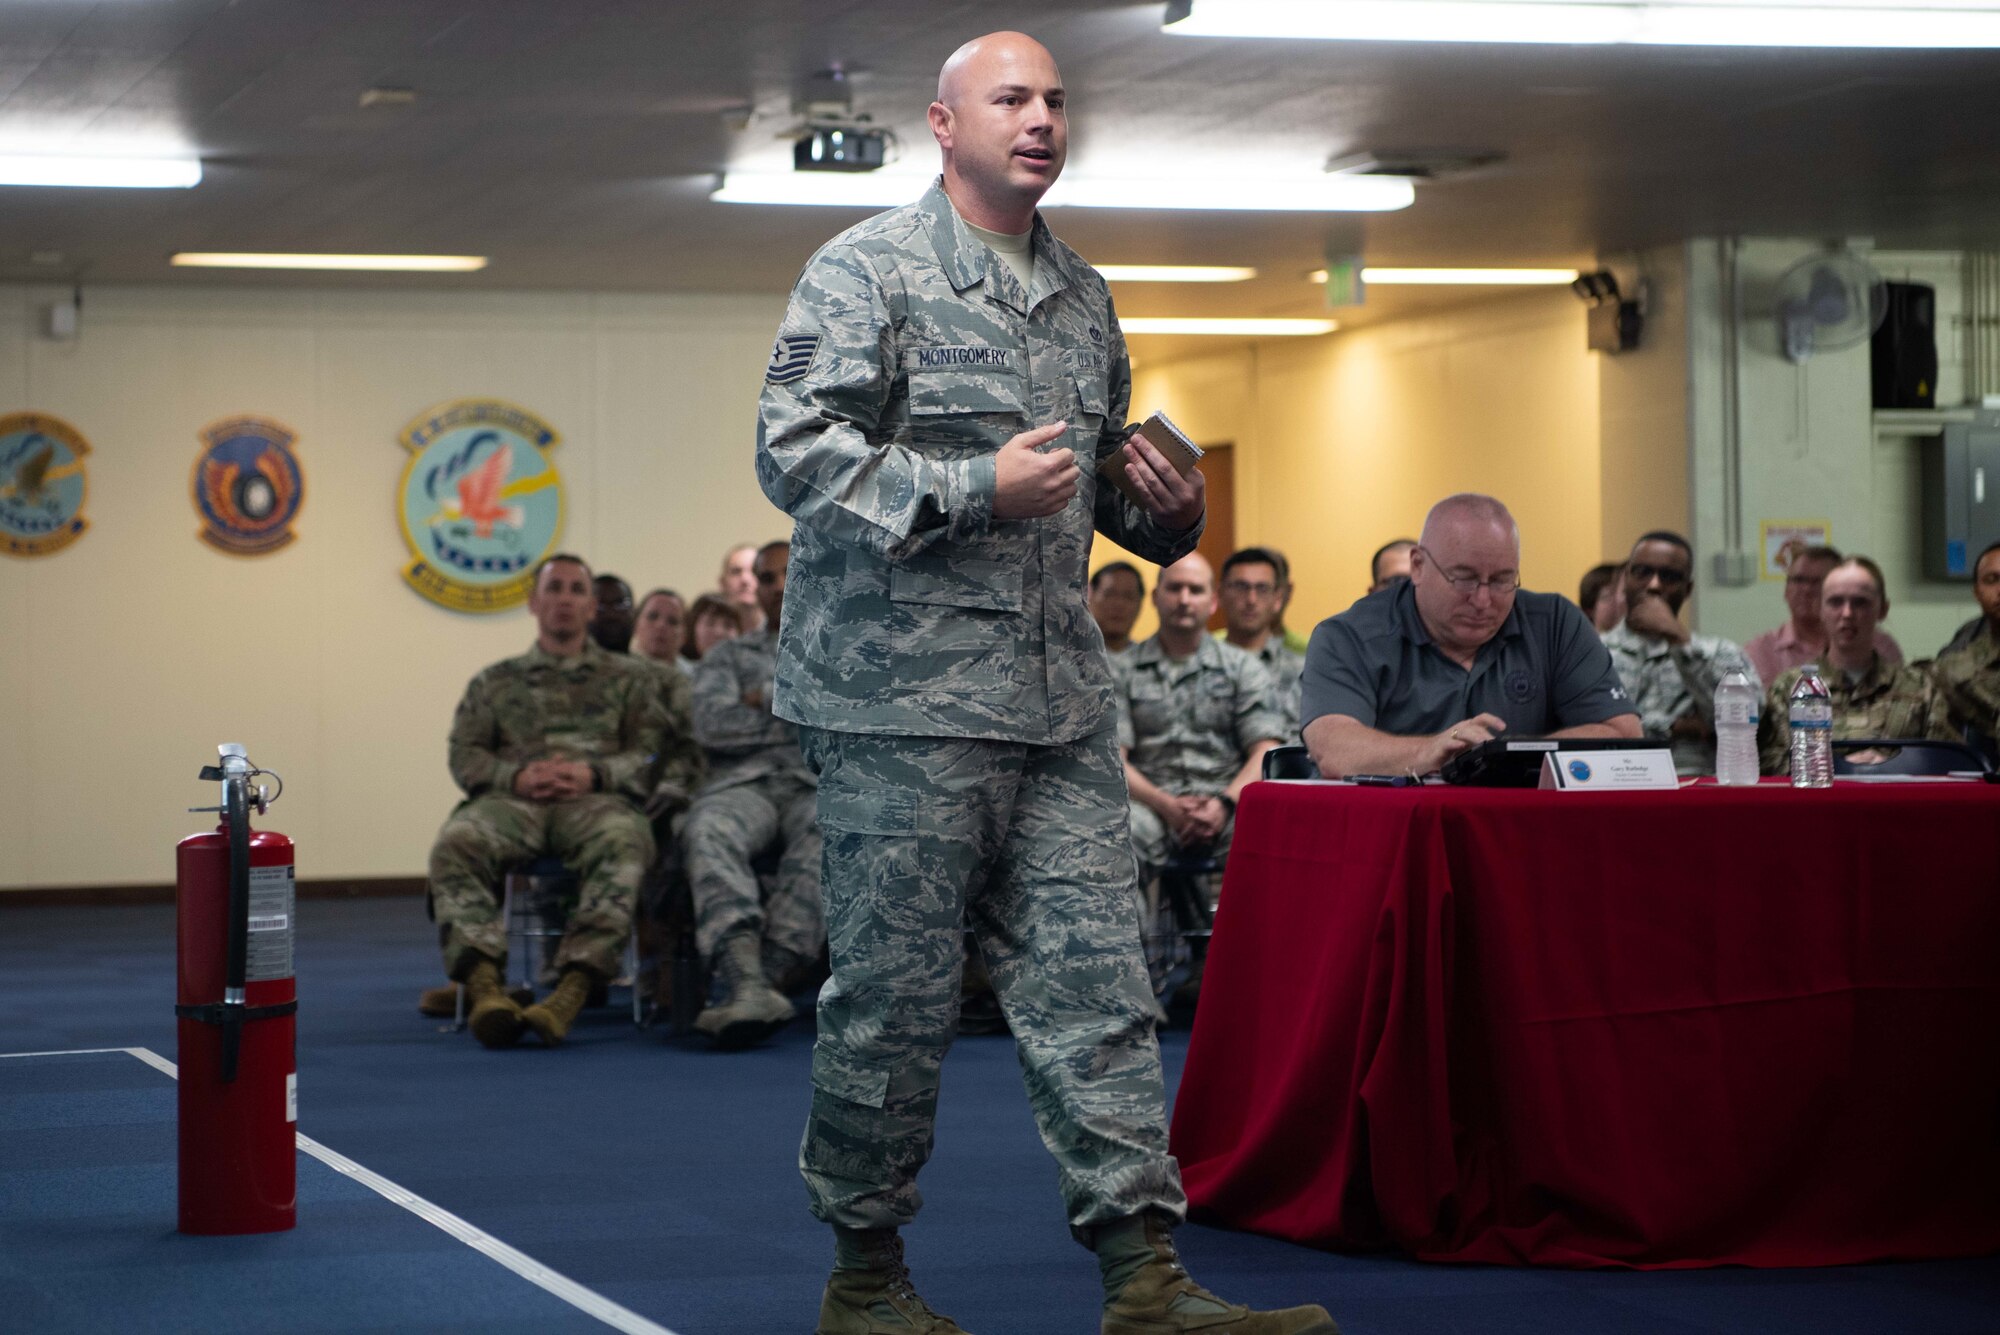 U.S. Air Force Tech. Sgt. Joshua Montgomery, 18th Civil Engineer Squadron firefighter, presents his idea for an environmentally friendly fire extinguisher disposal system May. 10, 2019, at Kadena Air Base, Japan.